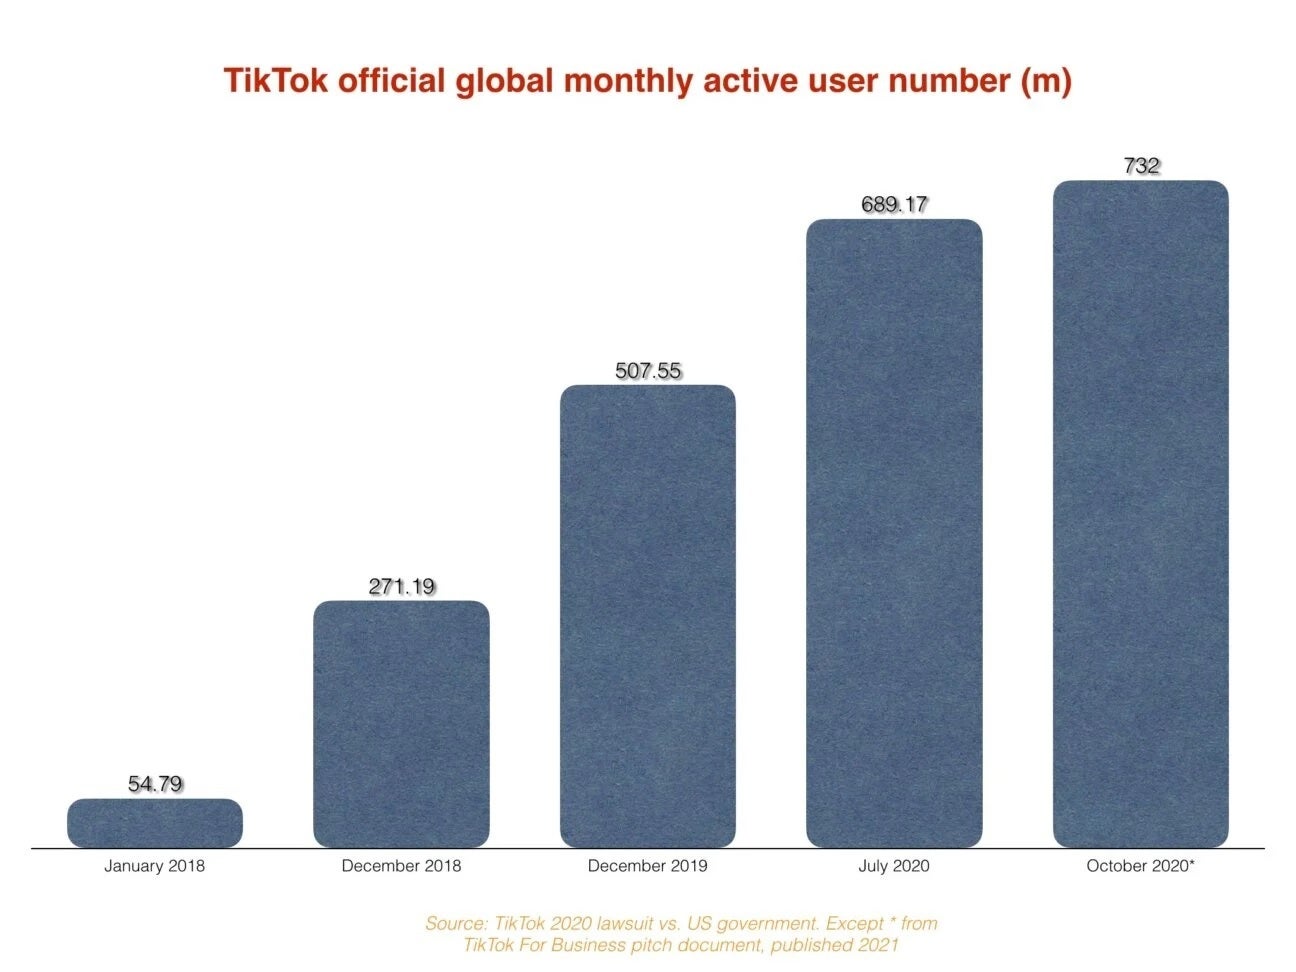 At the current pace, by May 2022 TikTok will have reached 1 billion global monthly active users - TikTok, seeking advertisers, reveals info about its subscribers and how they use the app